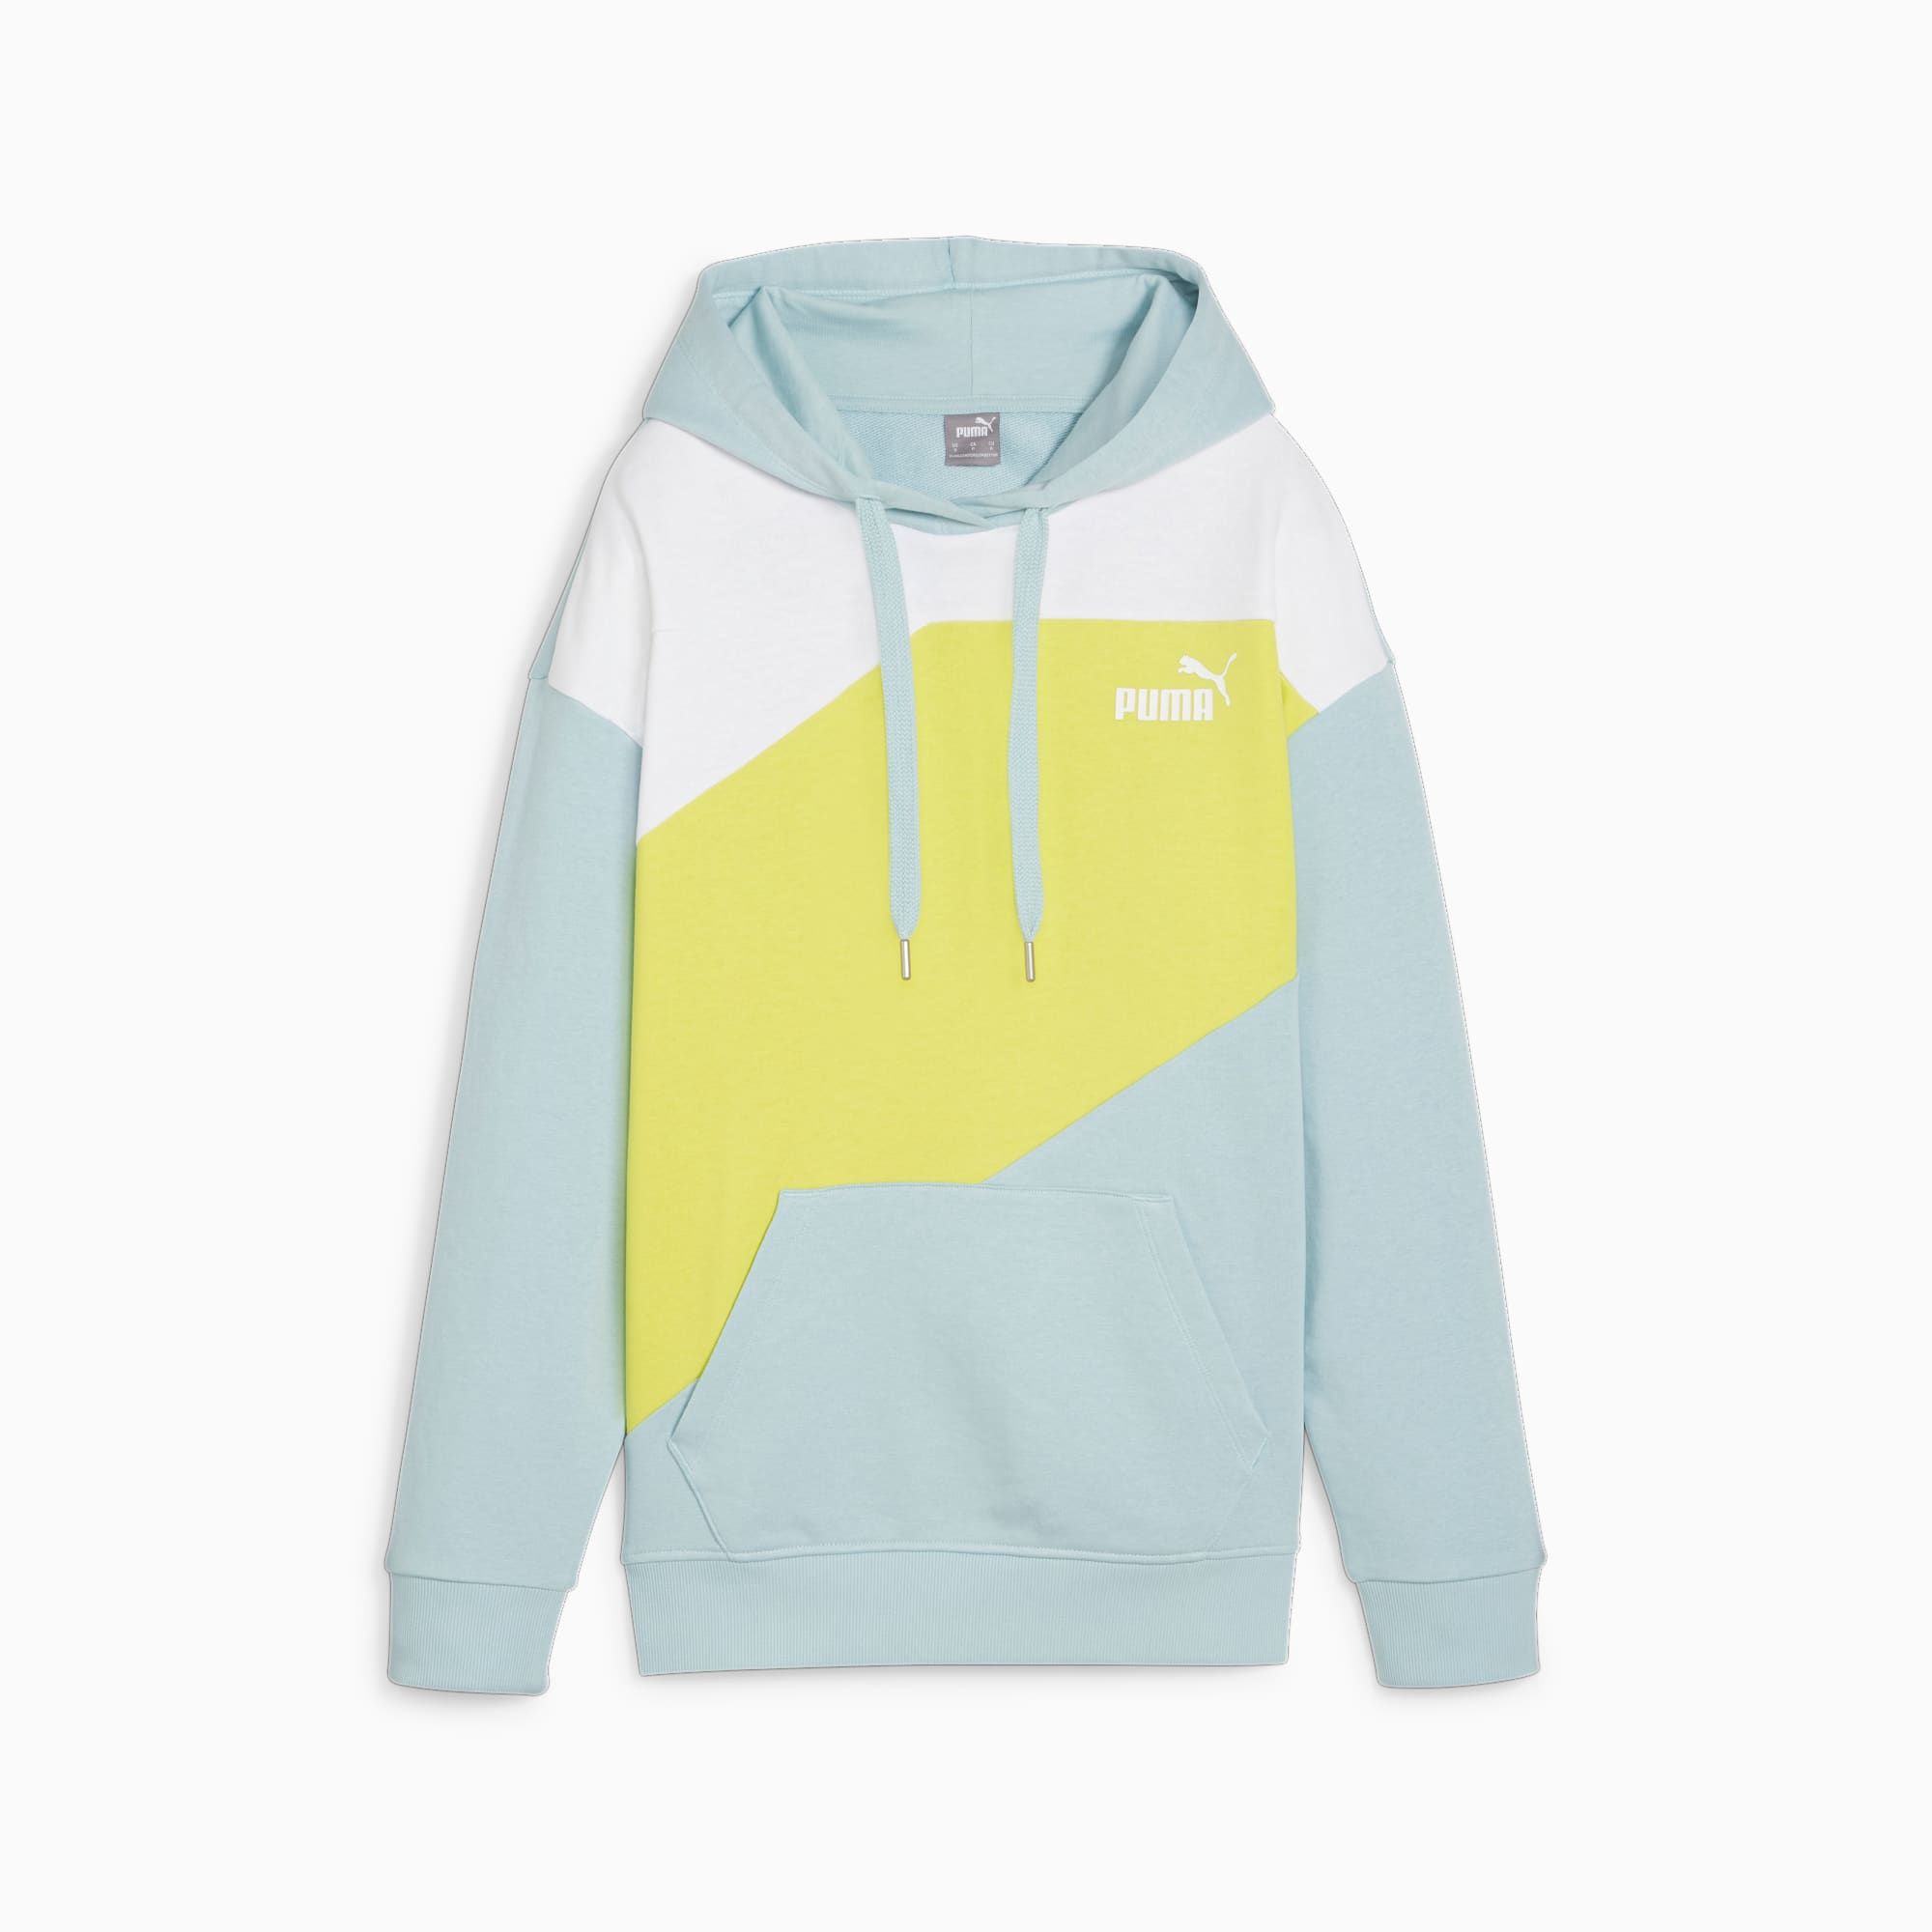 PUMA Power Women's Hoodie, Turquoise Surf, Size XS, Clothing